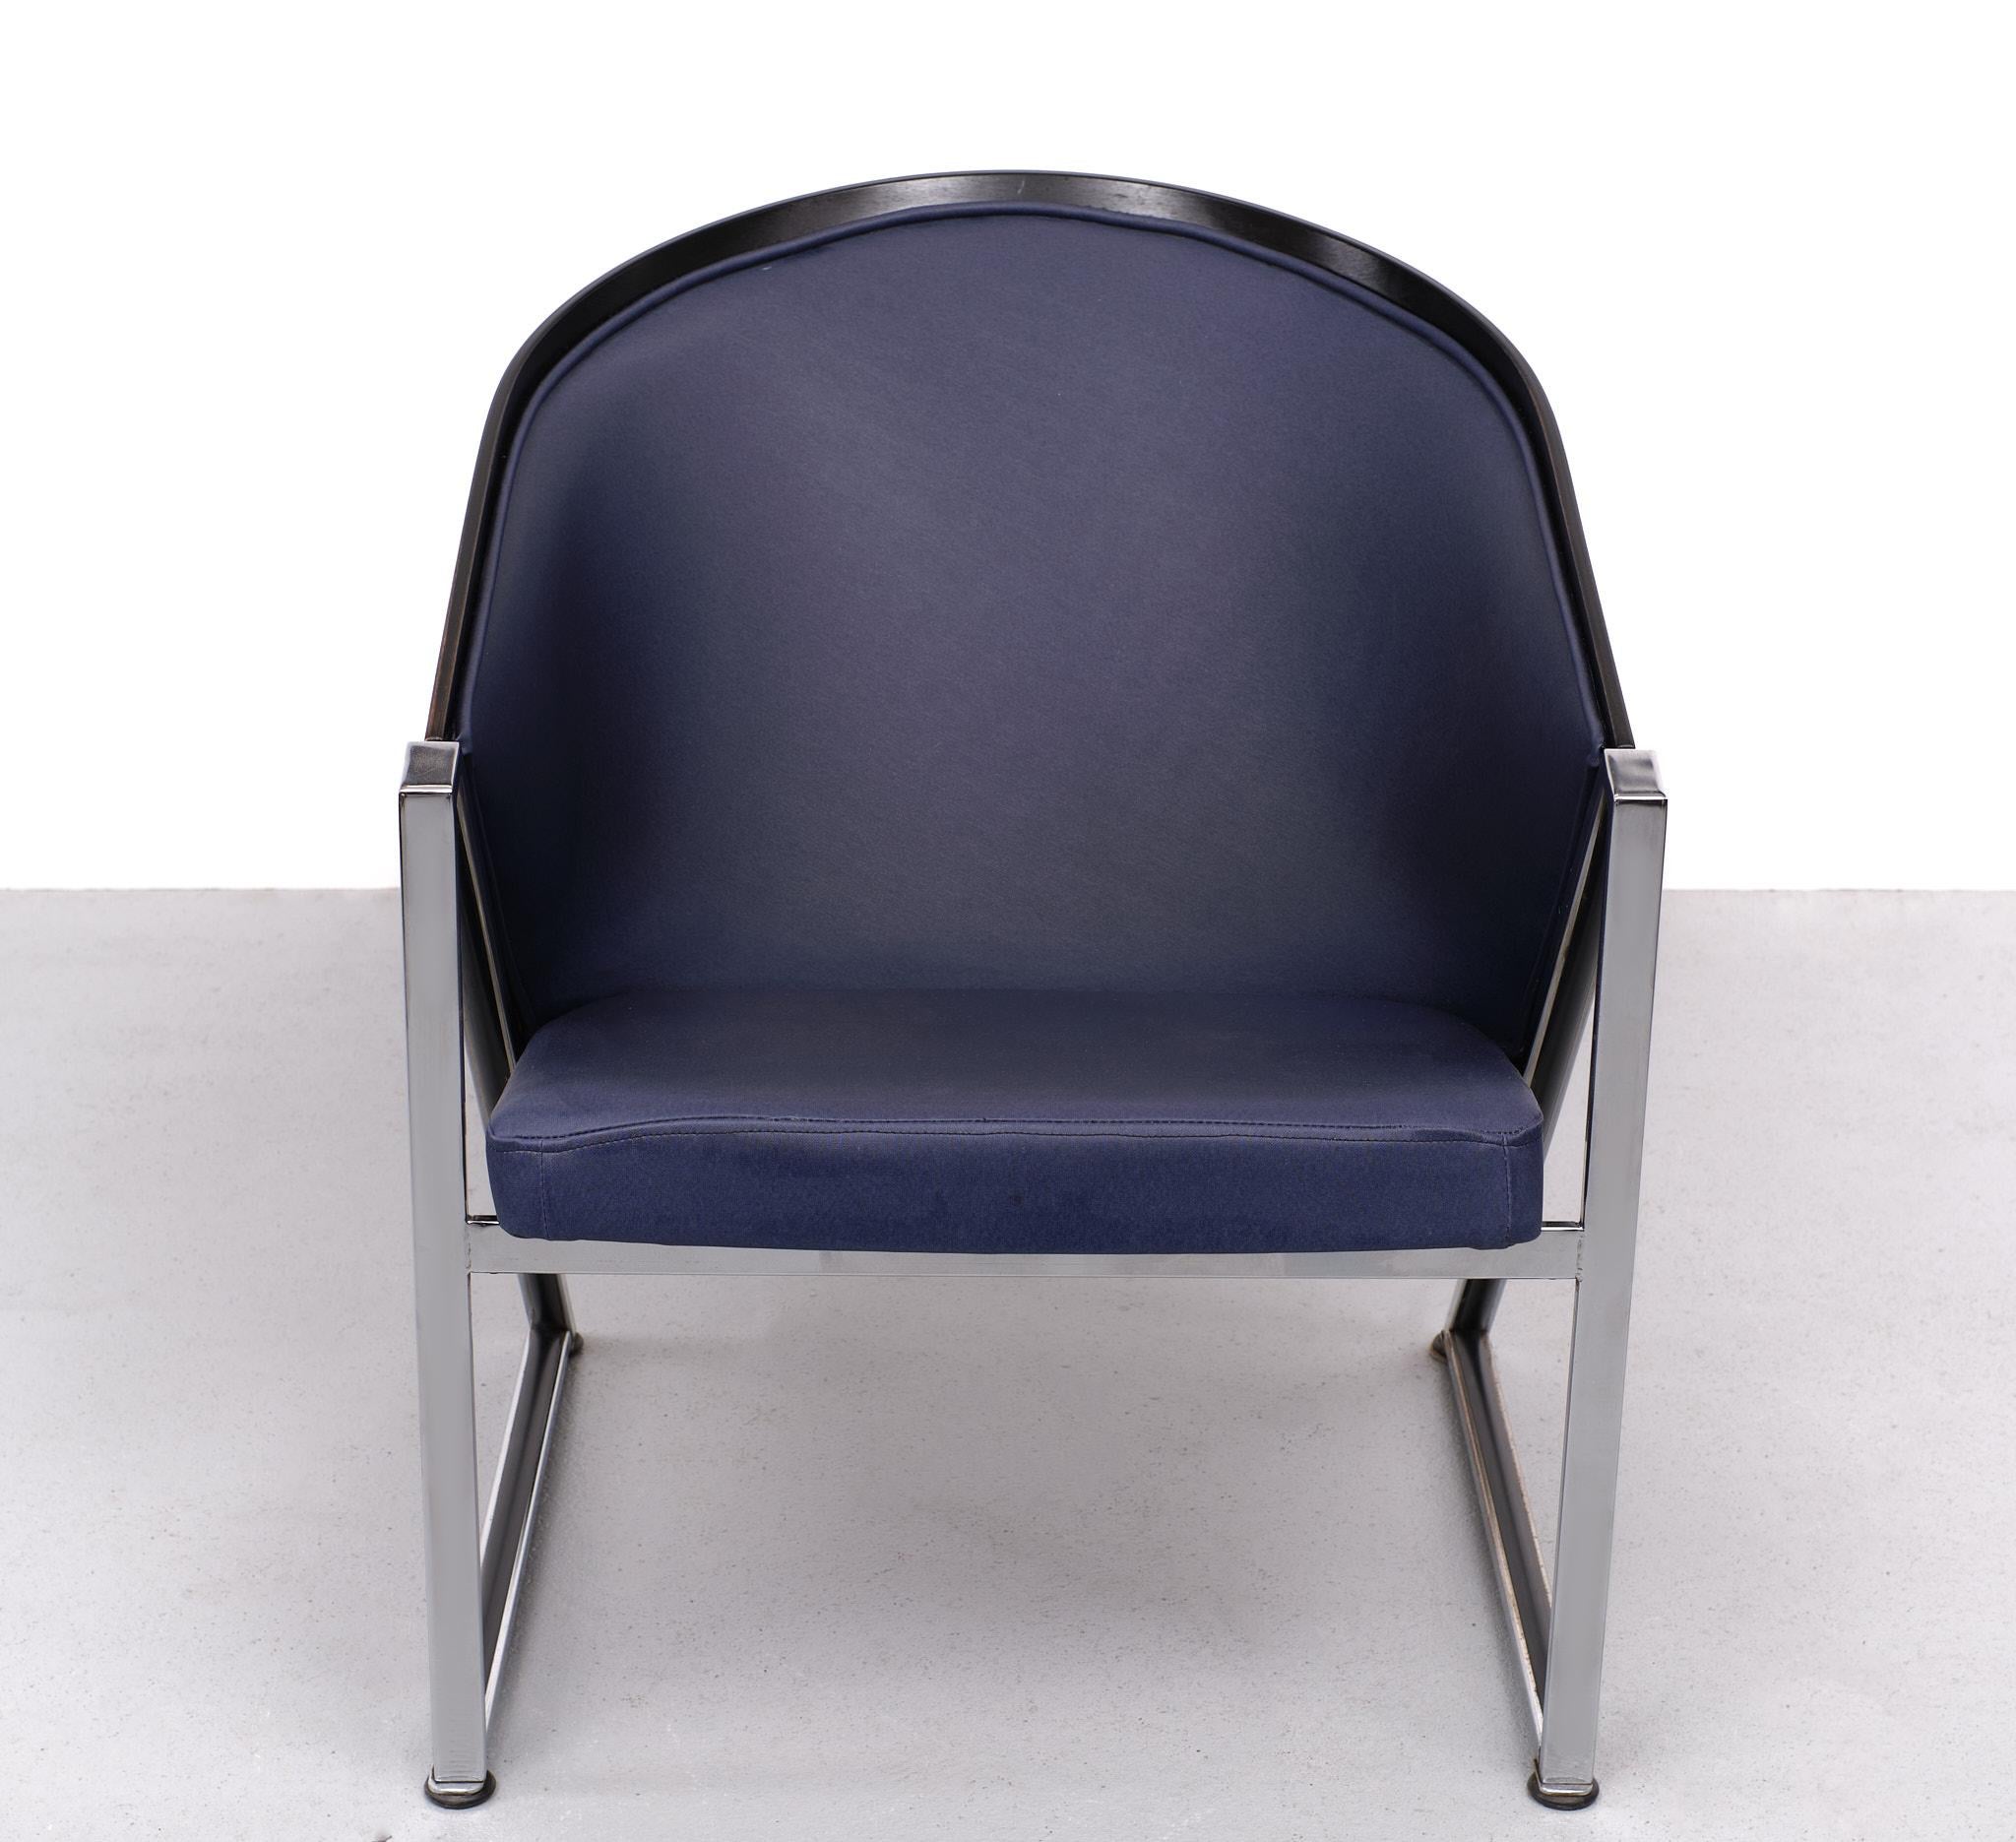 Very nice post modern mondi soft chair designed by the Finnish architect Jouko Jarvisalo for Innocences OY Finland in the 1980s. The chair features a heavy chromed frame with a lacquered plywood shell ,blue vinyl upholstery. Remains in very good